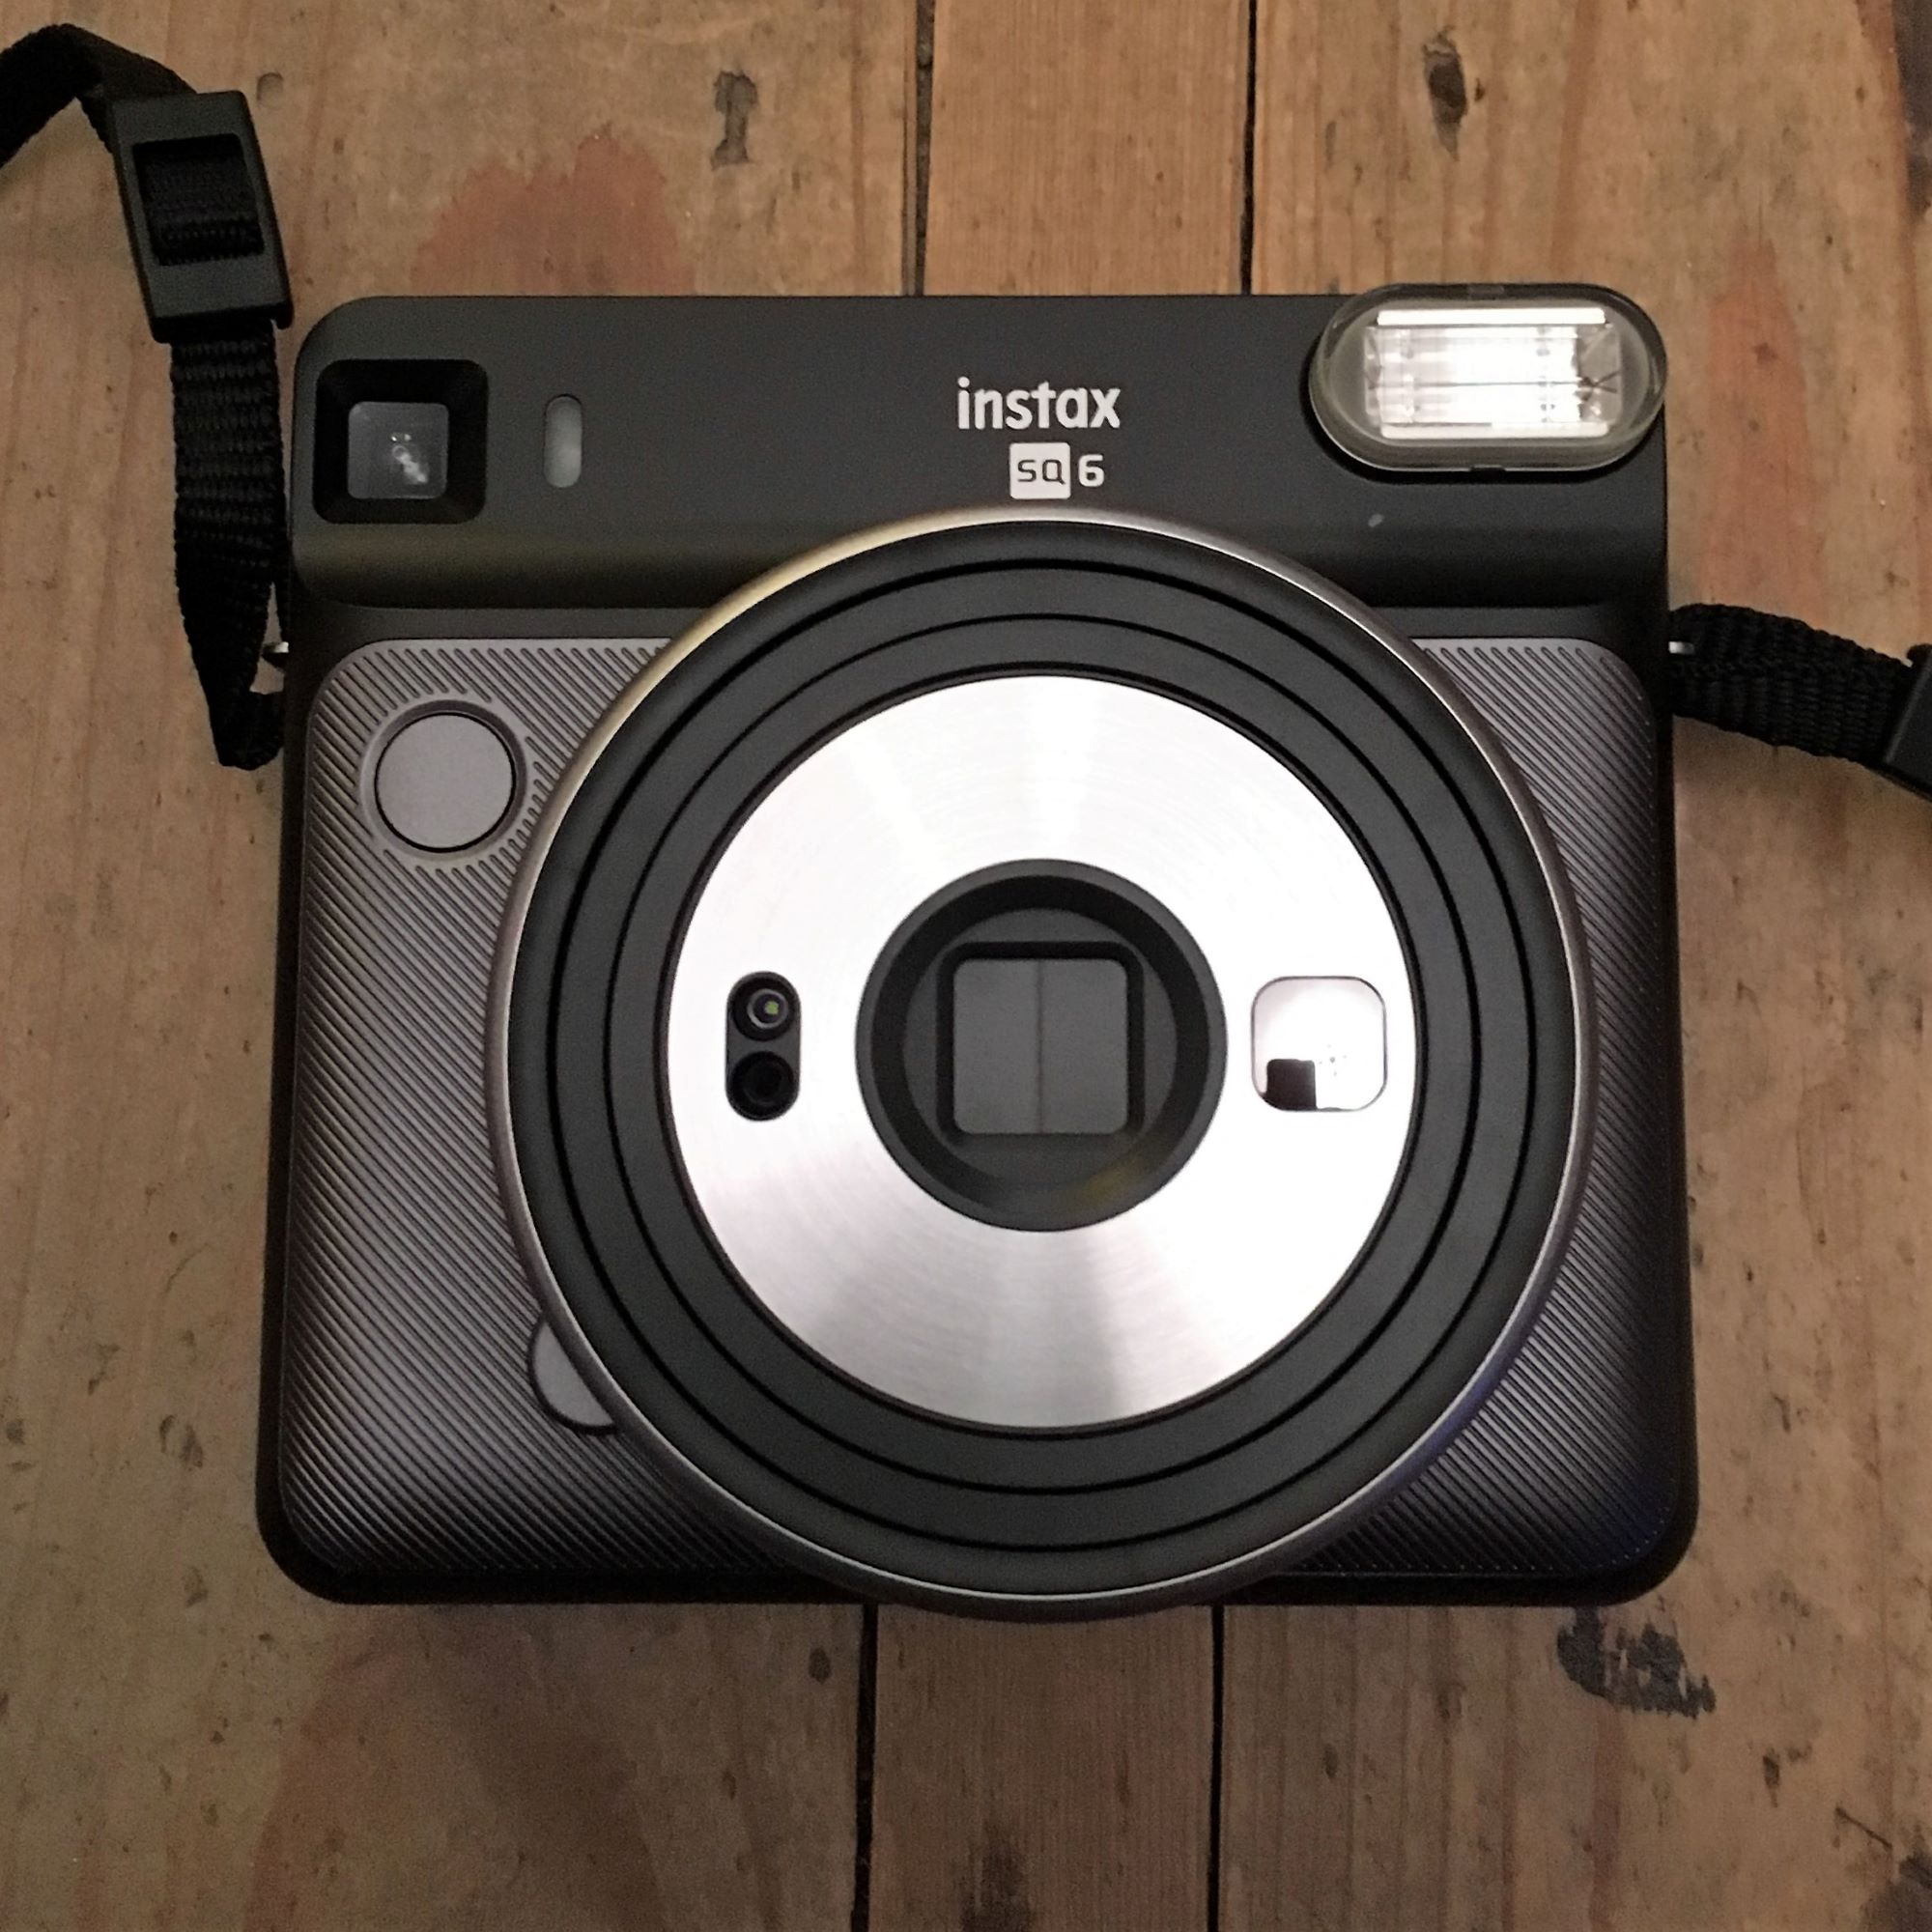 Square The Six - A Two pack review of the Fujifilm Instax Square